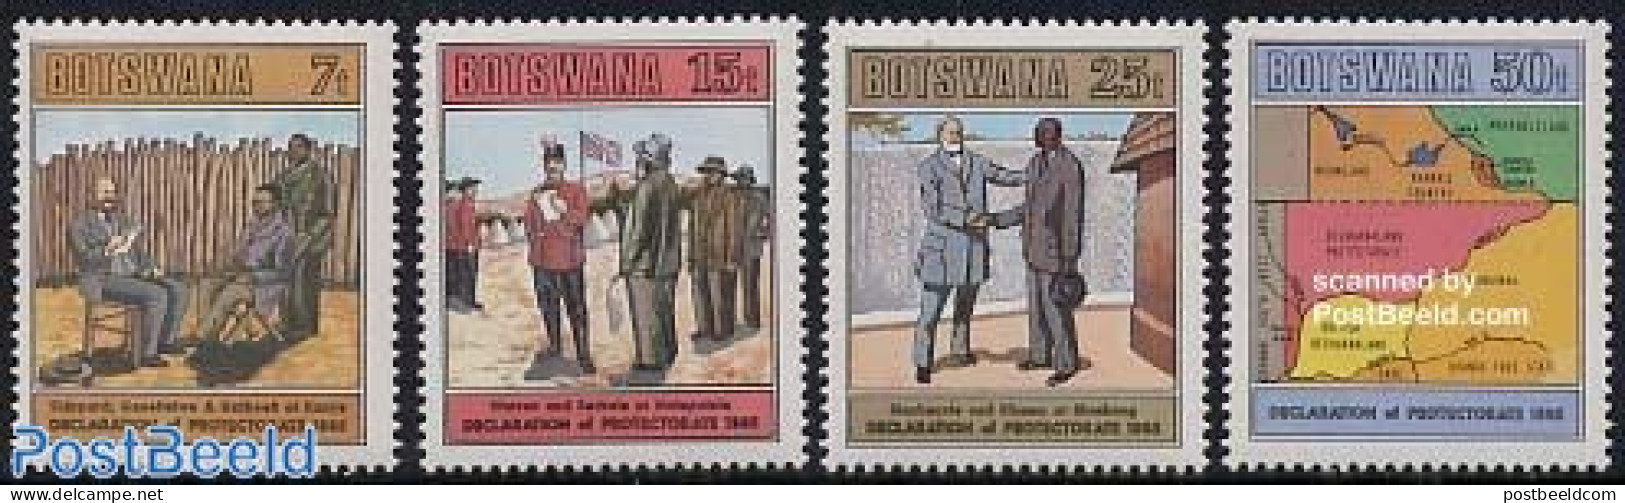 Botswana 1985 Bechuanaland Protectorate 4v, Mint NH, History - Various - History - Maps - Uniforms - Géographie